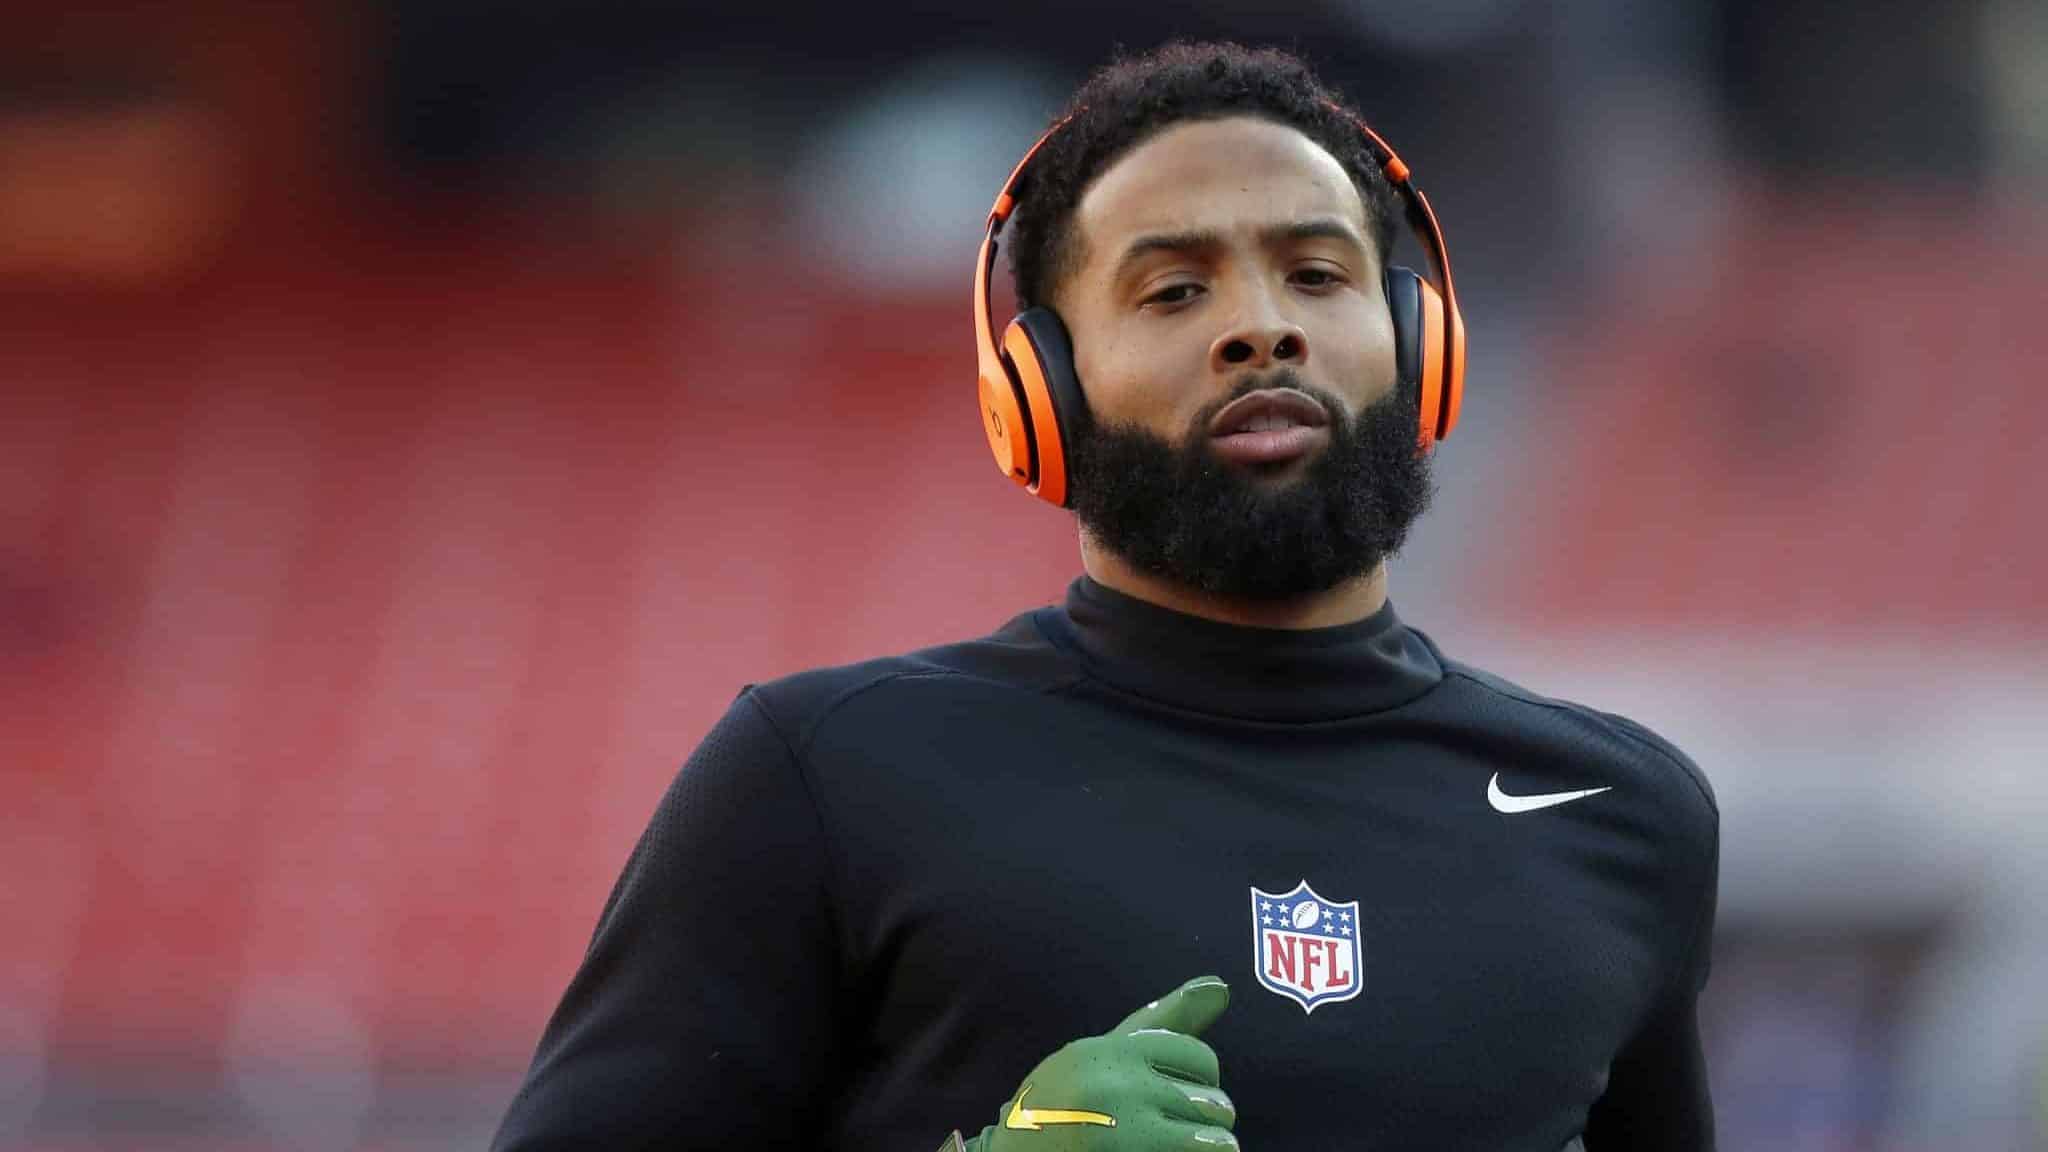 CLEVELAND, OHIO - DECEMBER 22: Odell Beckham Jr. #13 of the Cleveland Browns warms up prior to the game against the Baltimore Ravens at FirstEnergy Stadium on December 22, 2019 in Cleveland, Ohio.